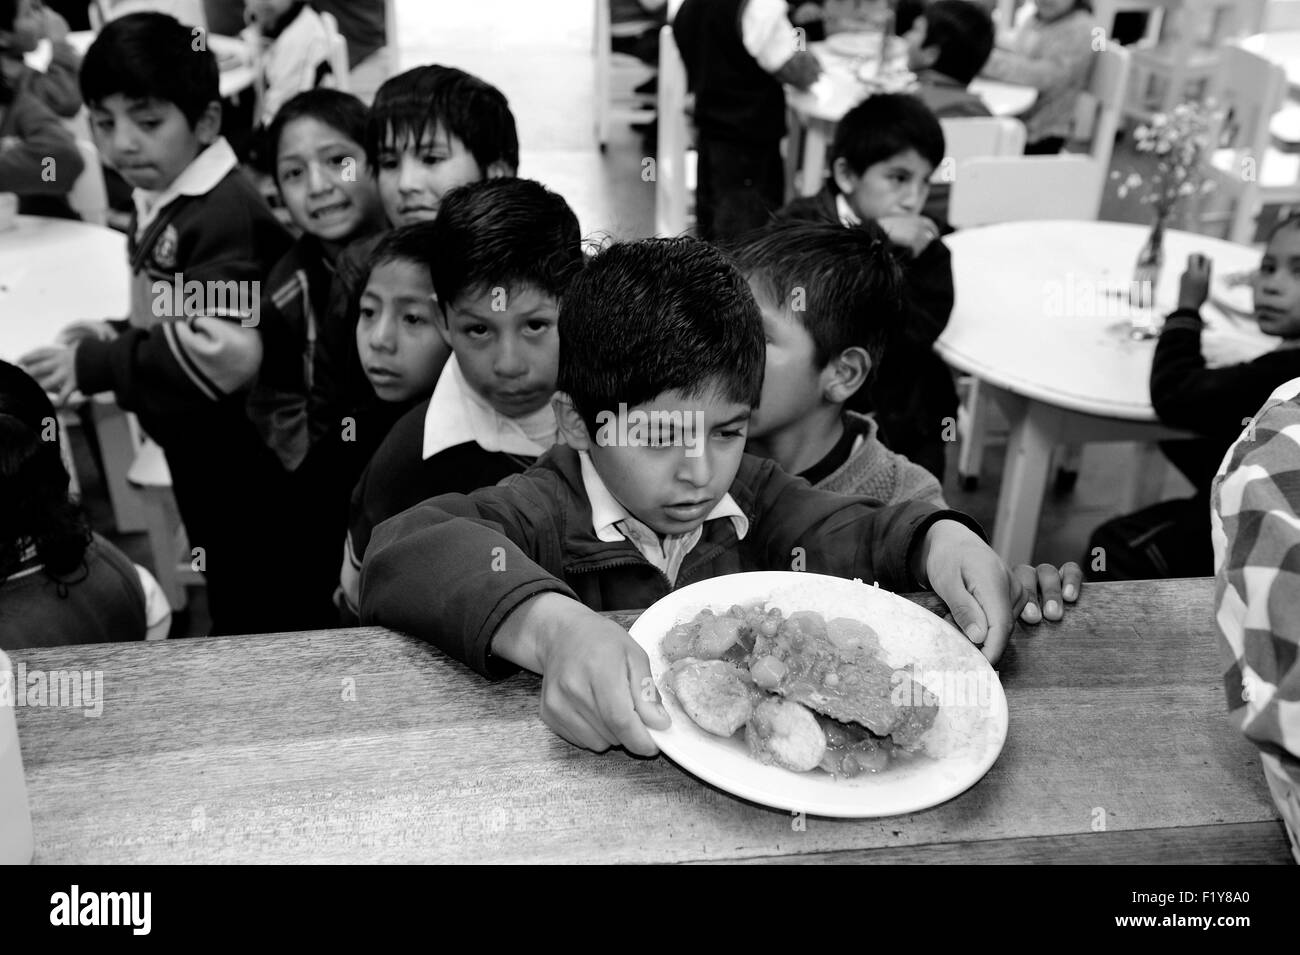 Peru, Cuzco Province, Cuzco, lunch service in one of the restaurants of the Ninos Unidos Peruanos Charitable Foundation which is in charge of 600 street children and provides education, care and food Stock Photo